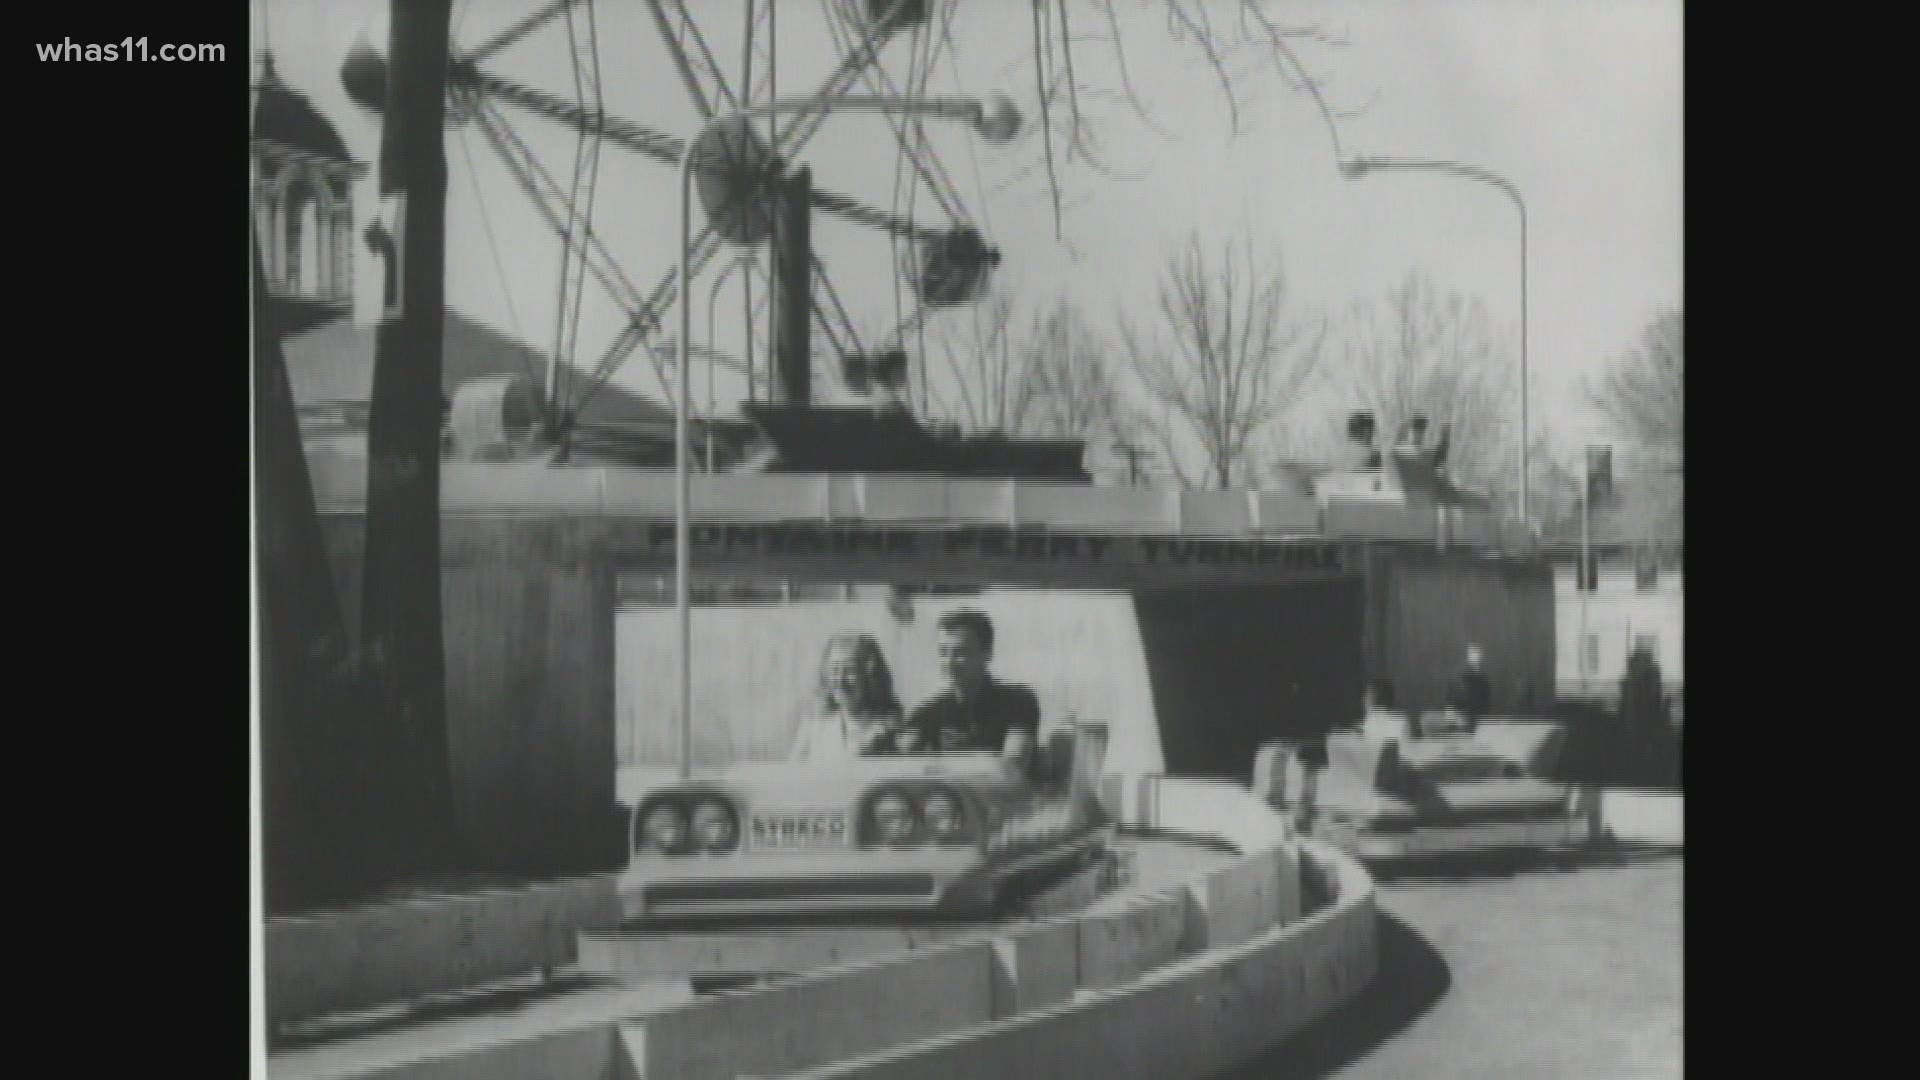 According to a news release, the museum is trying to acquire the former Fontaine Ferry Carousel and bring it back in time to celebrate its centennial year.